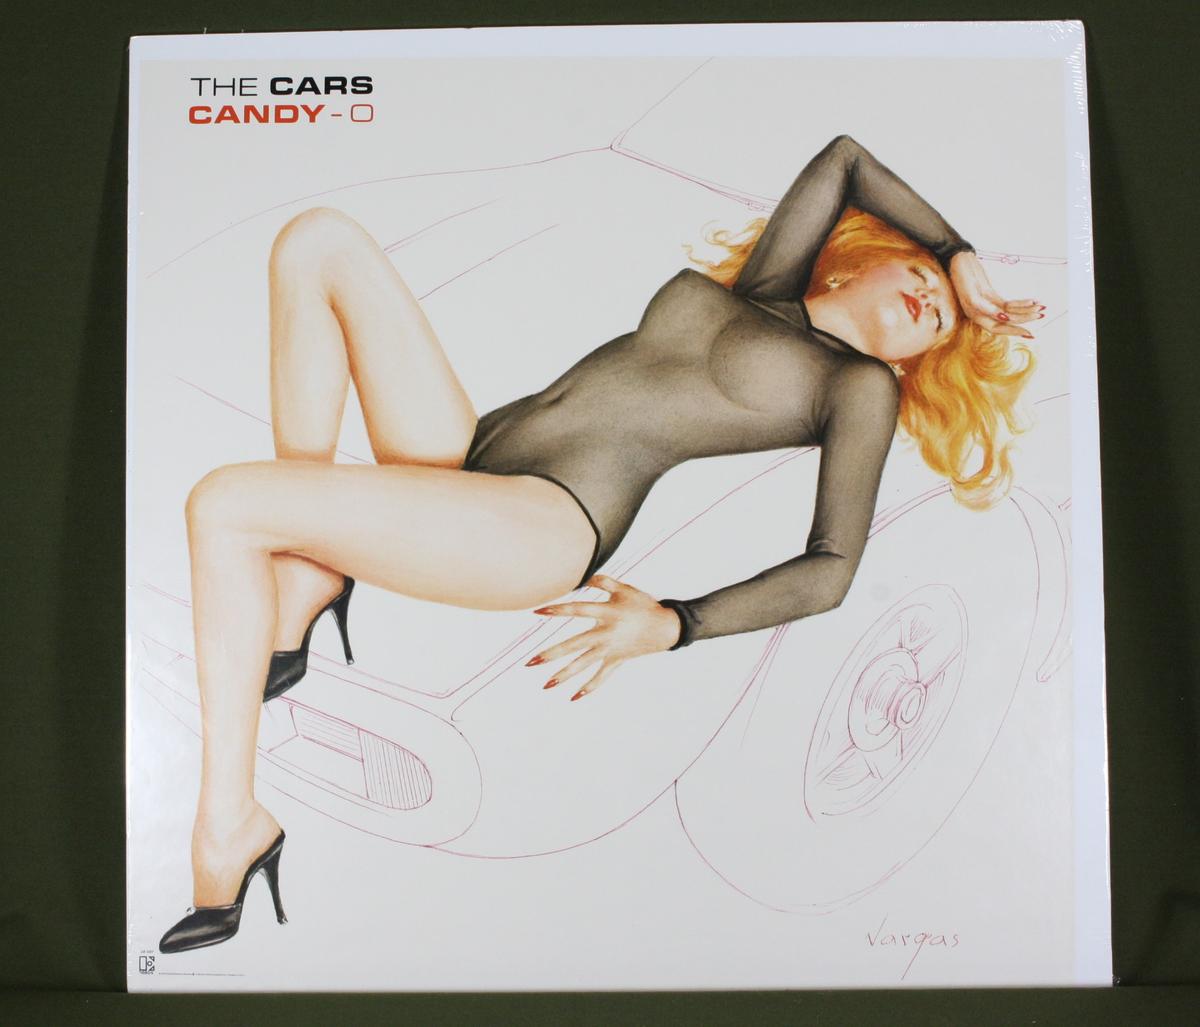 1979 The Cars “Candy-O” pin-up record poster.